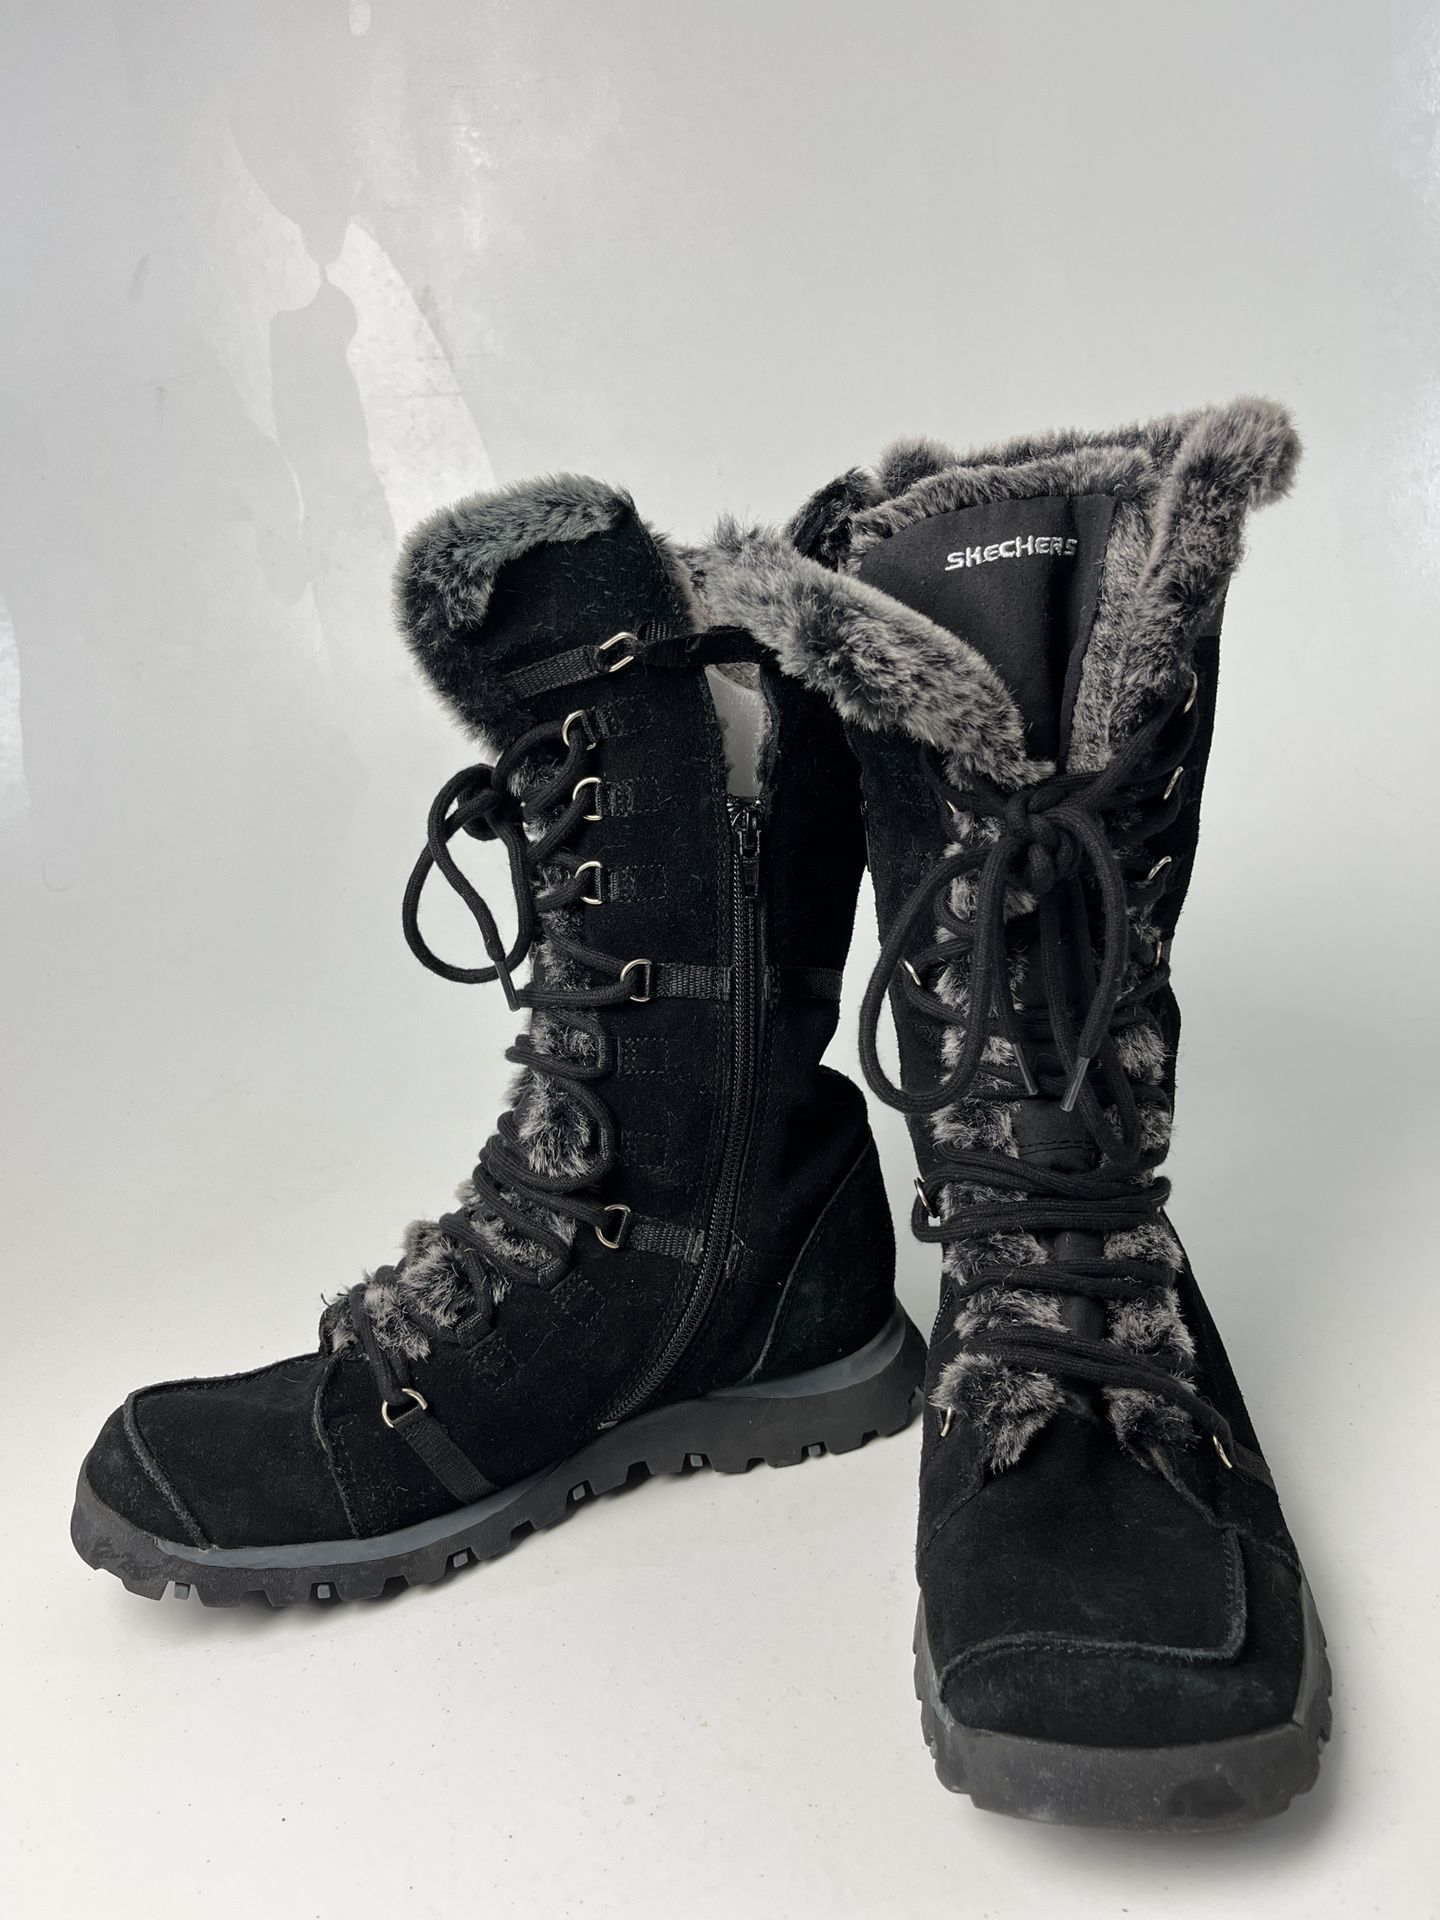 Skechers Grand Jams Black Leather W/Faux Fur Boots Womens Size 9.5 Snow Winter   Good used condition may have marks from age and use.  See pics for mo